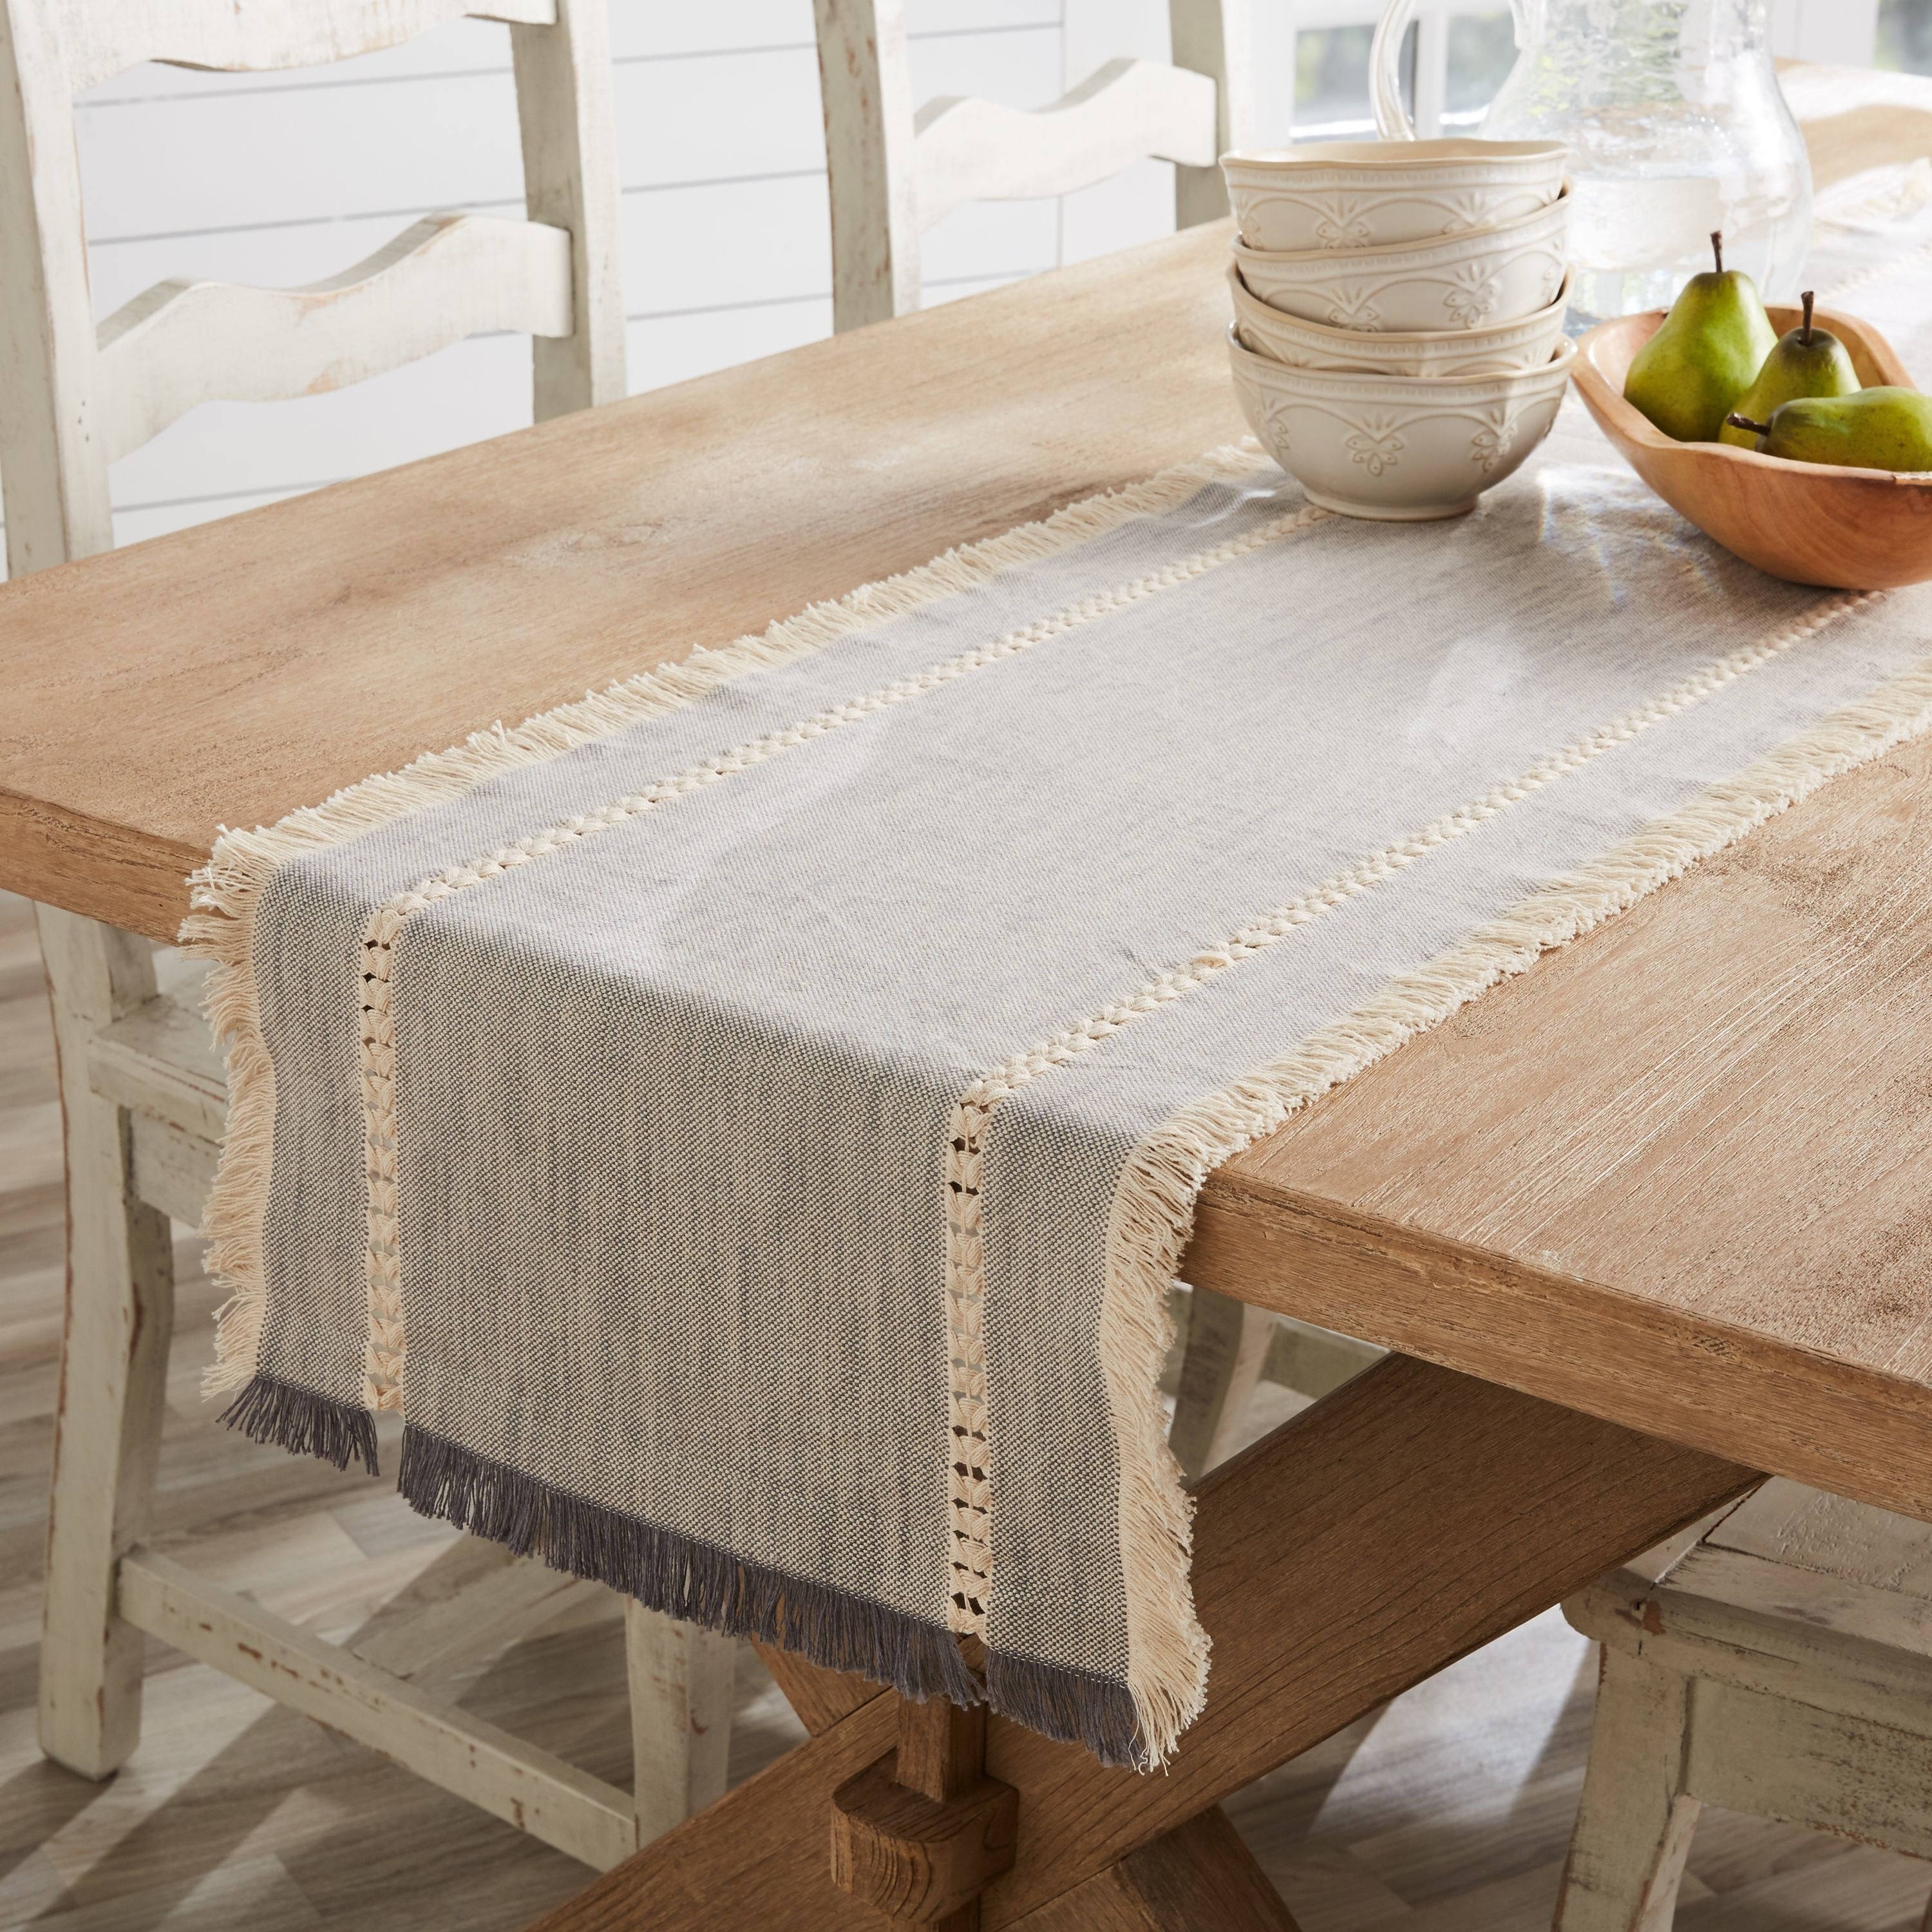 Grey table runner with beige tassels on a wooden dining room table